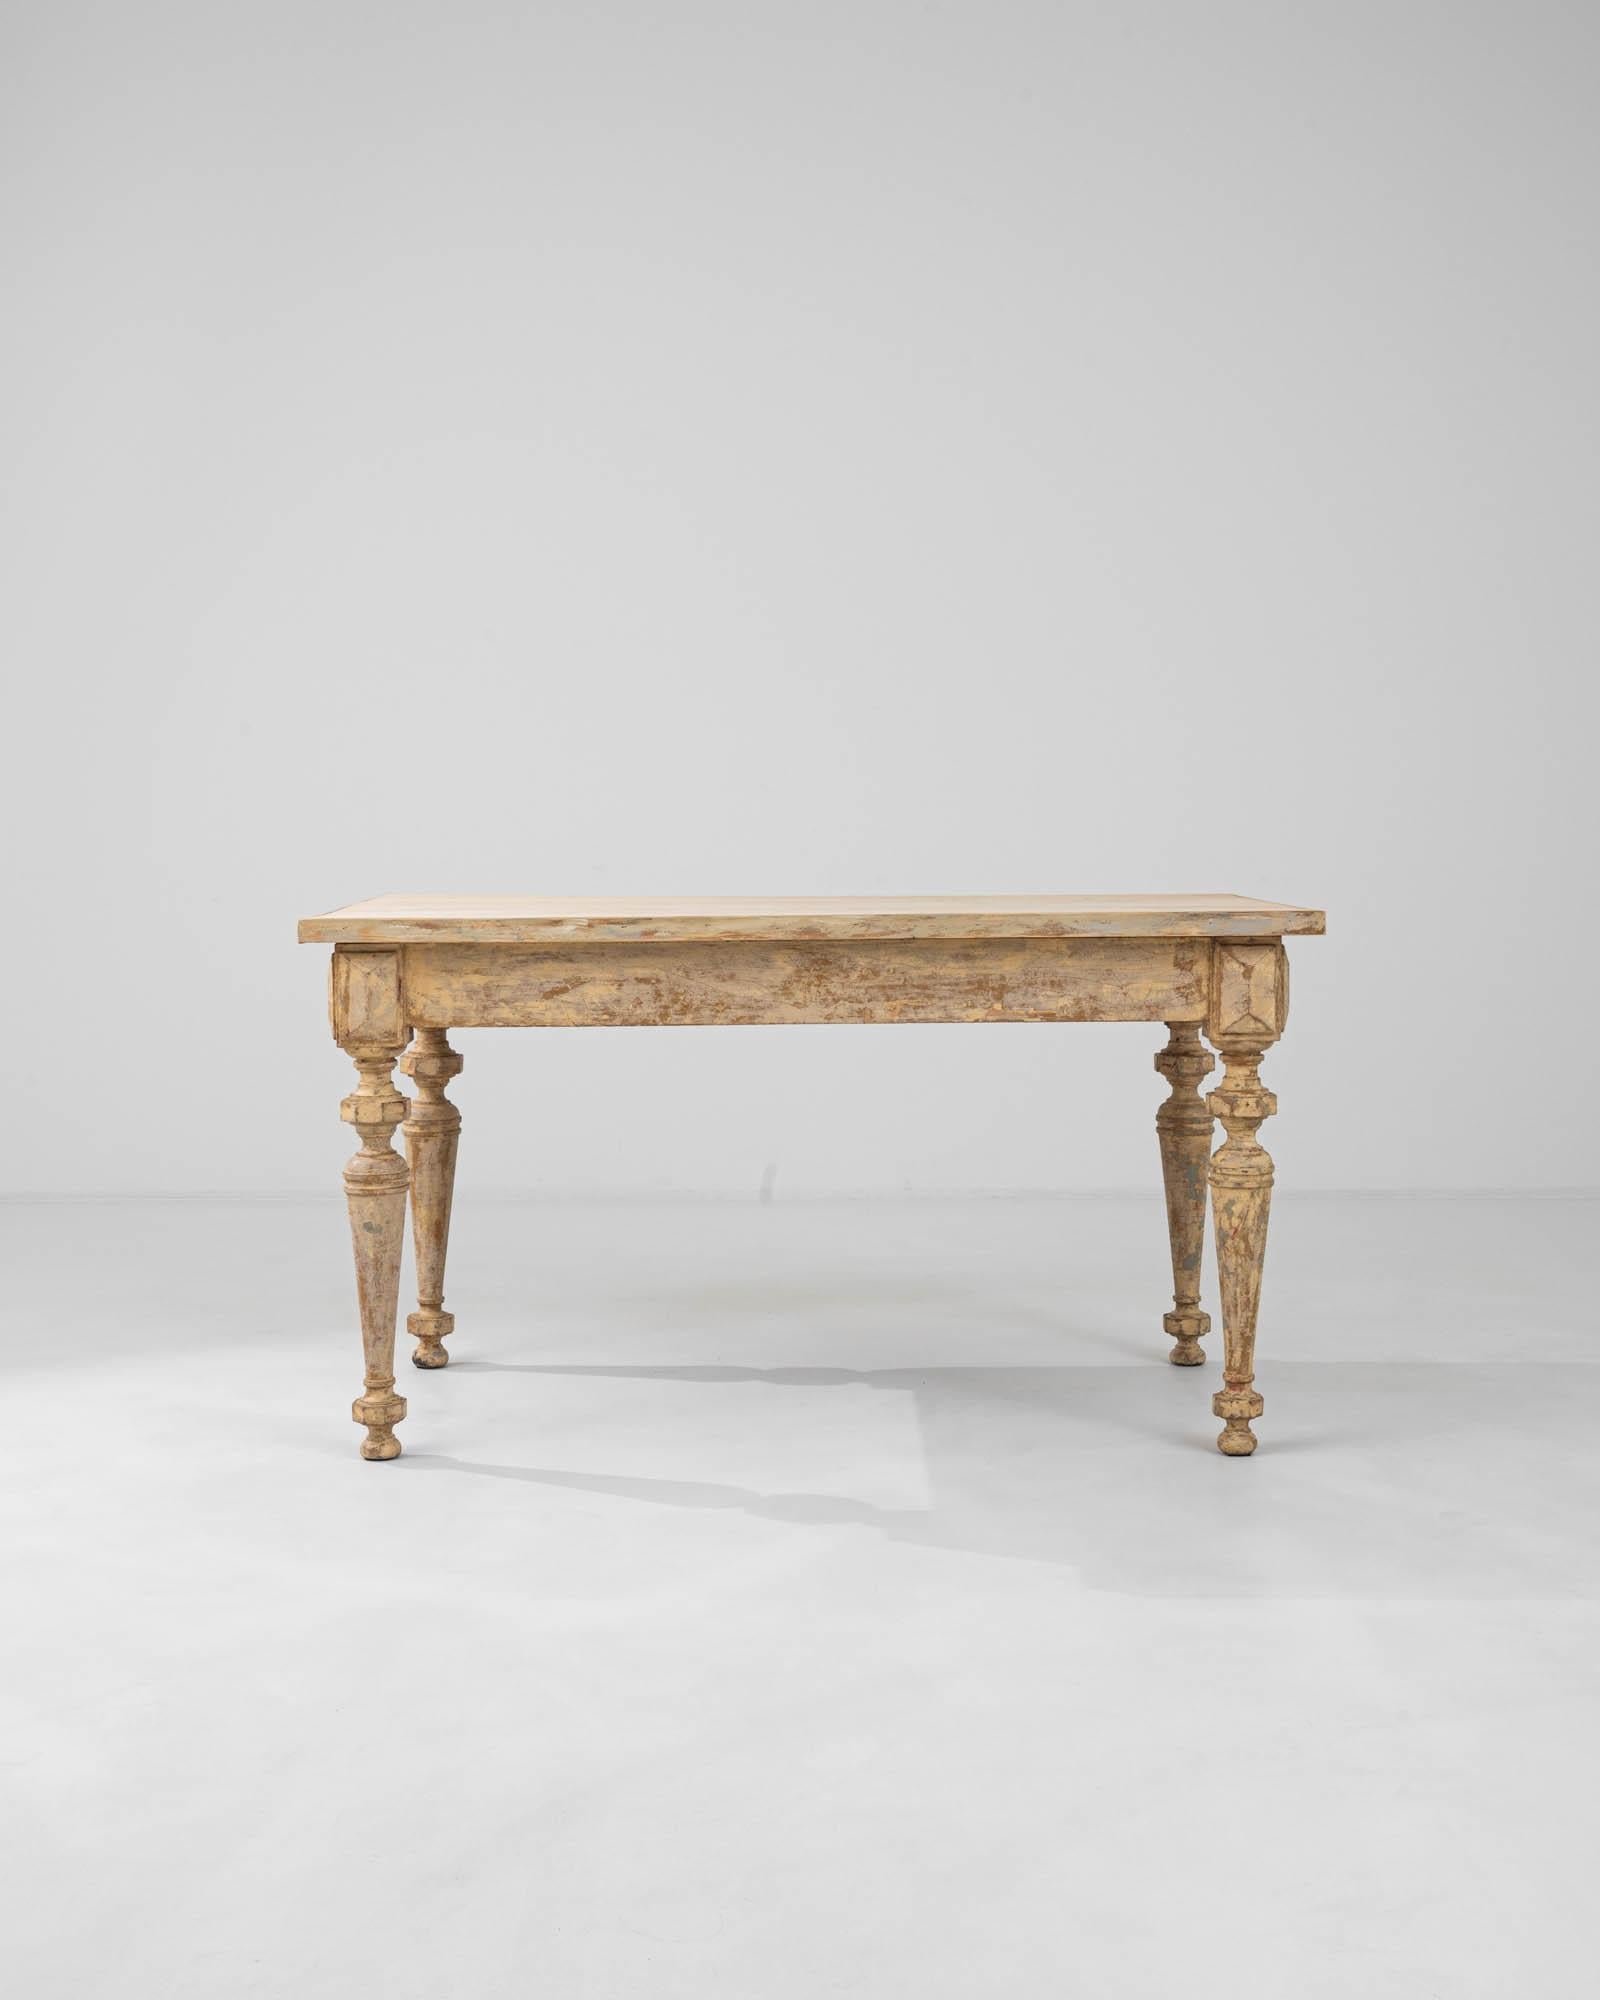 This 19th Century French wooden dining table is a remarkable testament to the timeless beauty of antique furniture. Its substantial surface, adorned with the gentle marks of time, stands upon elegantly carved legs whose deliberate distressing